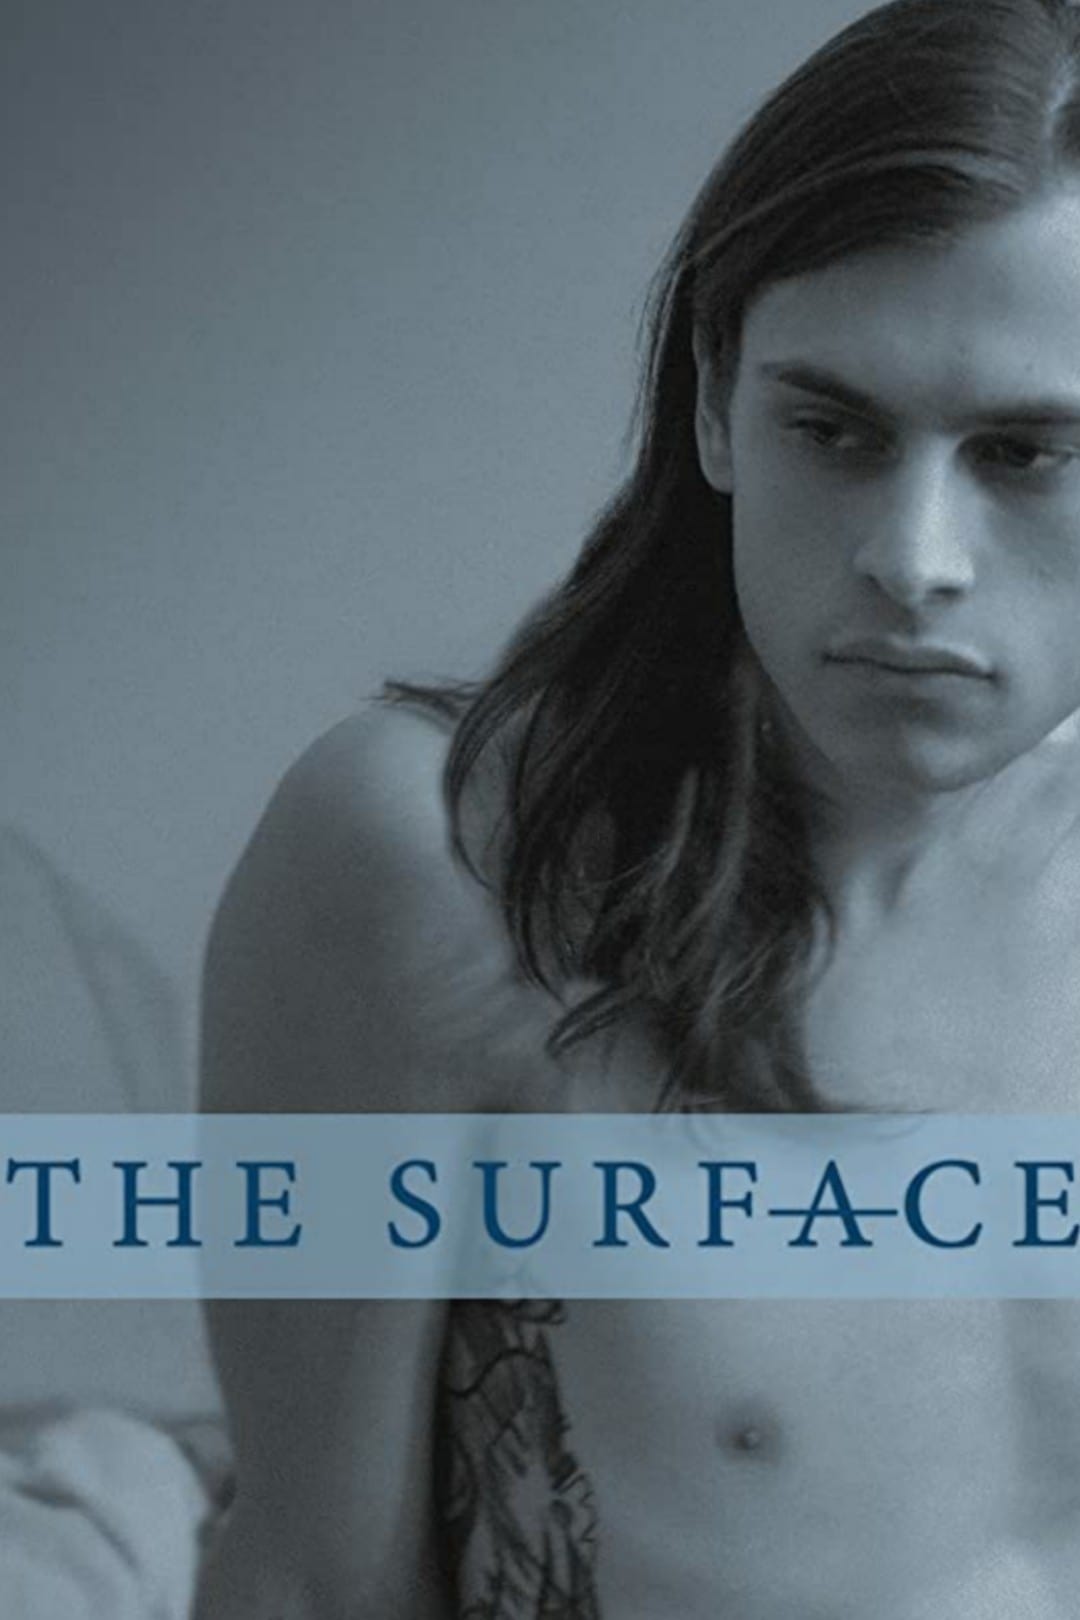 The Surface (2015)